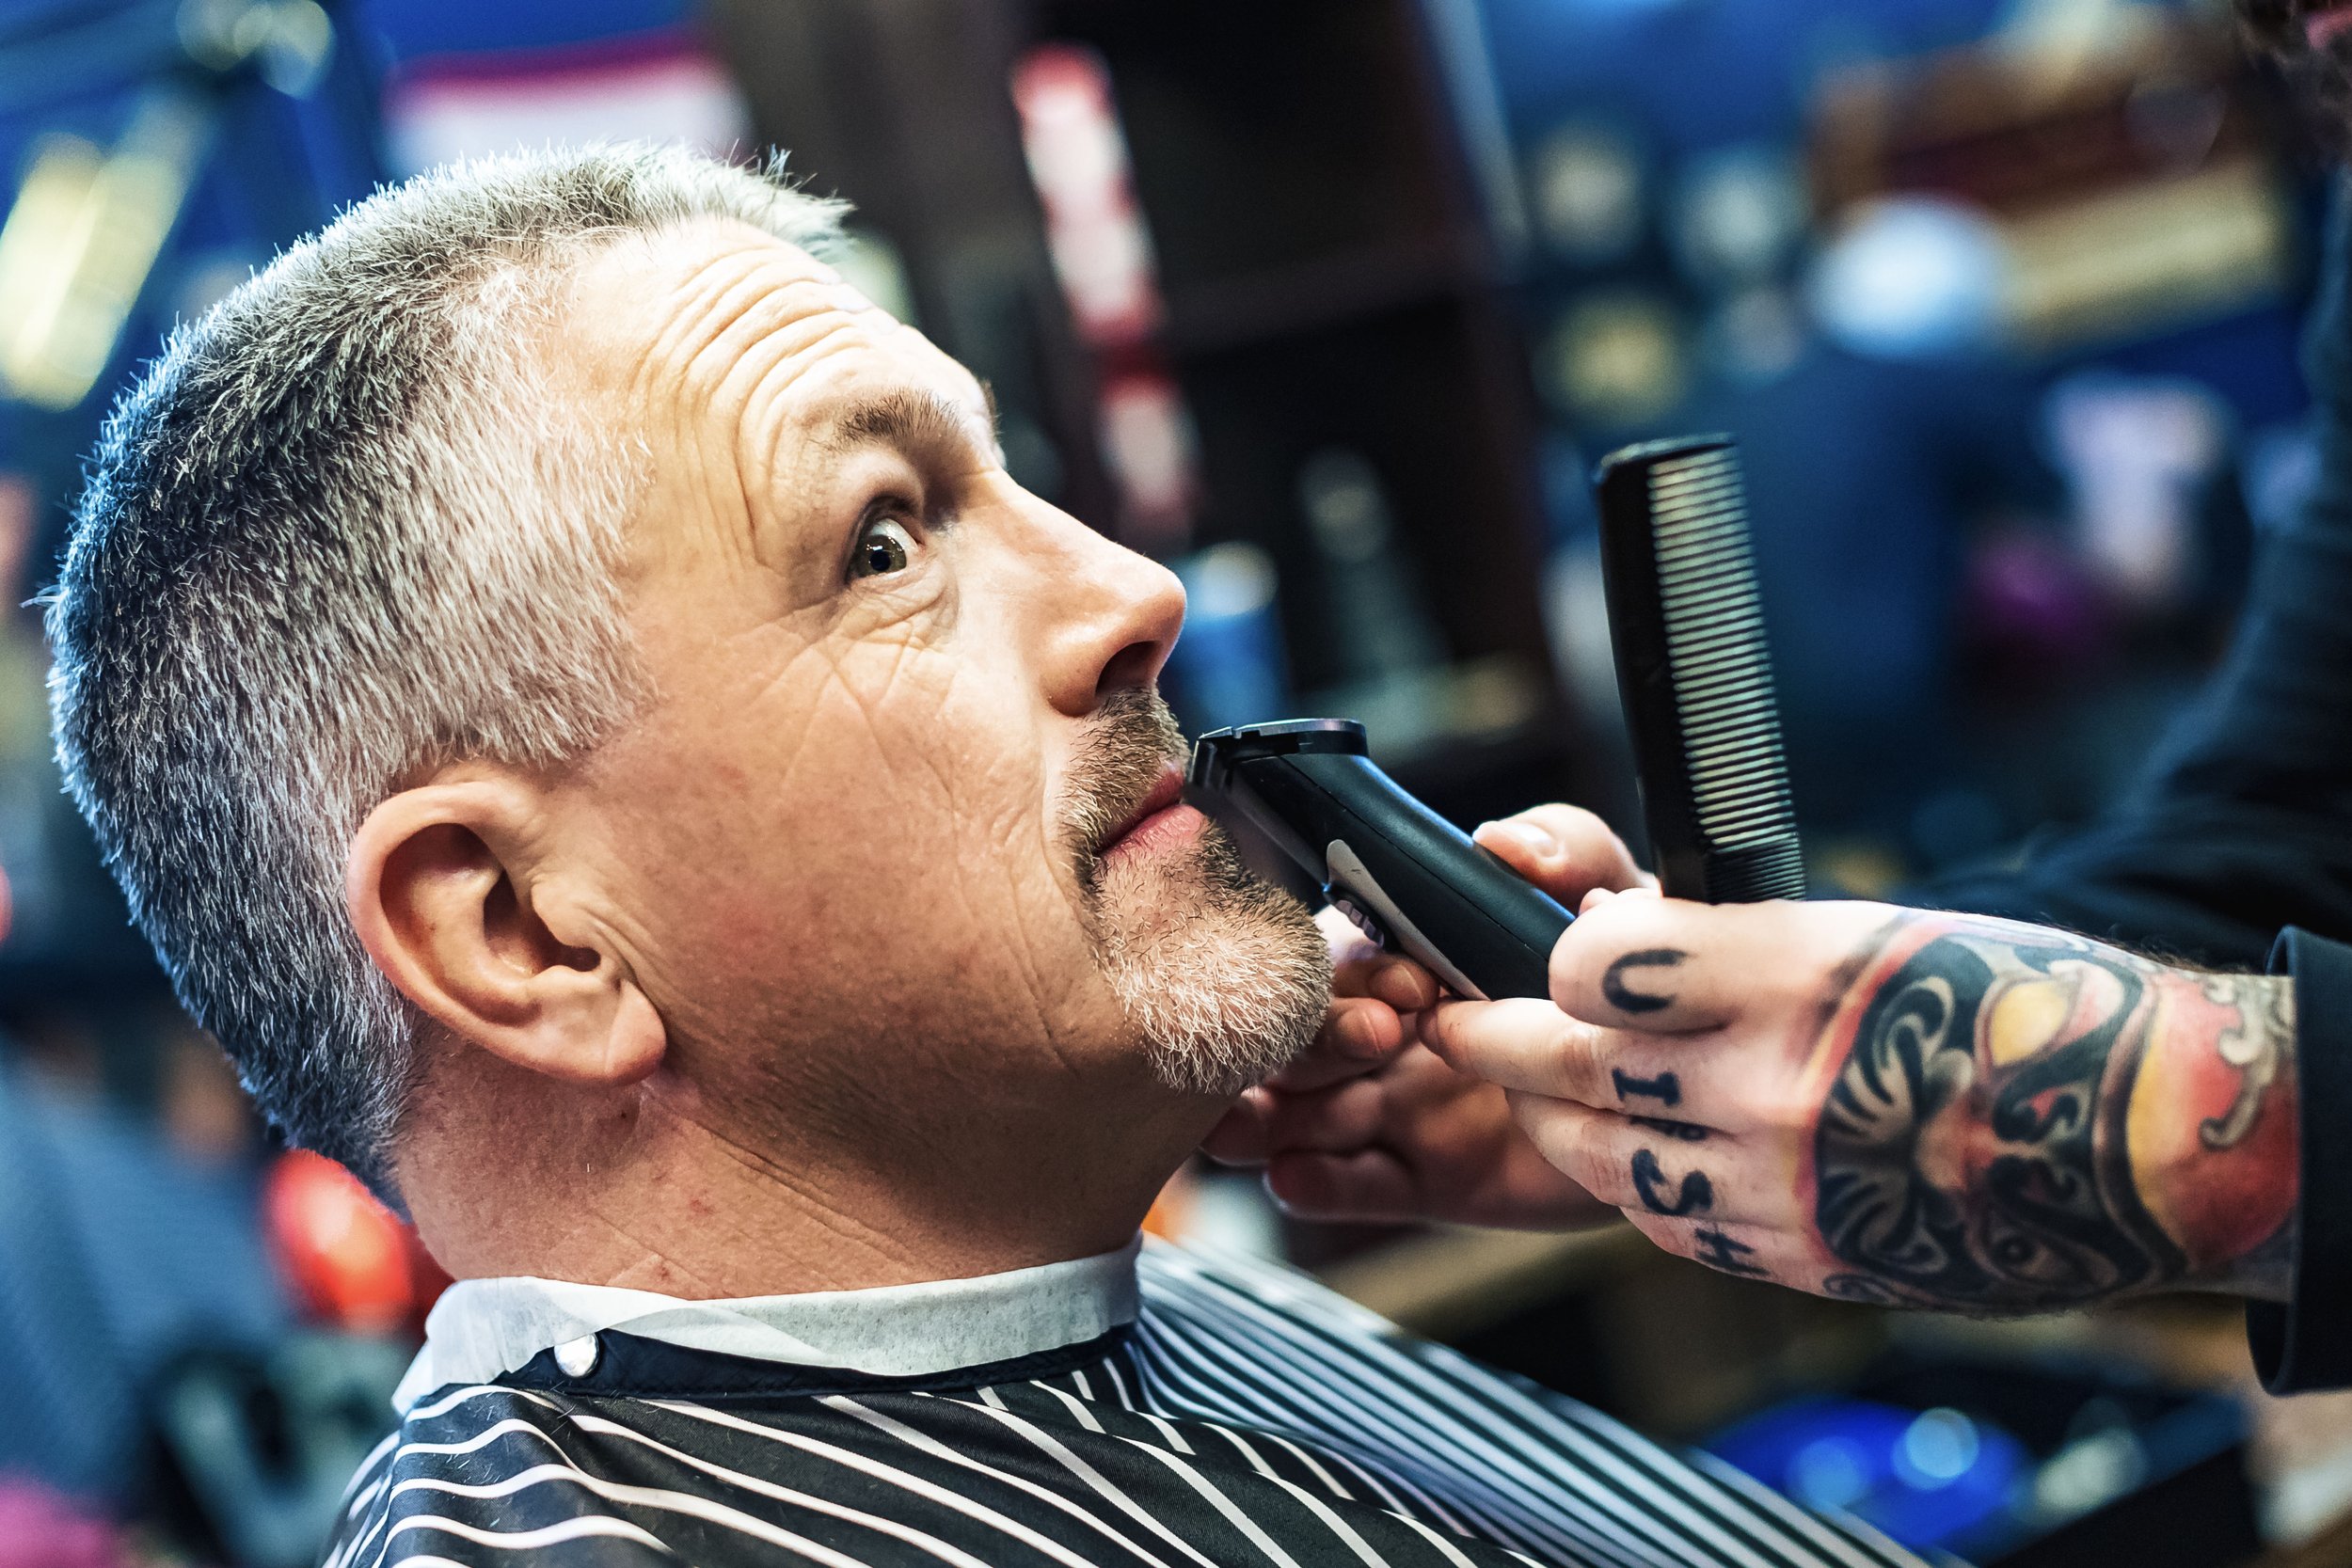  This is the FATHER OF THE BRIDE!  Also known as my brother-in-law.  I think he’s enjoying his shave at the Barber Shop this morning, don’t you think? 